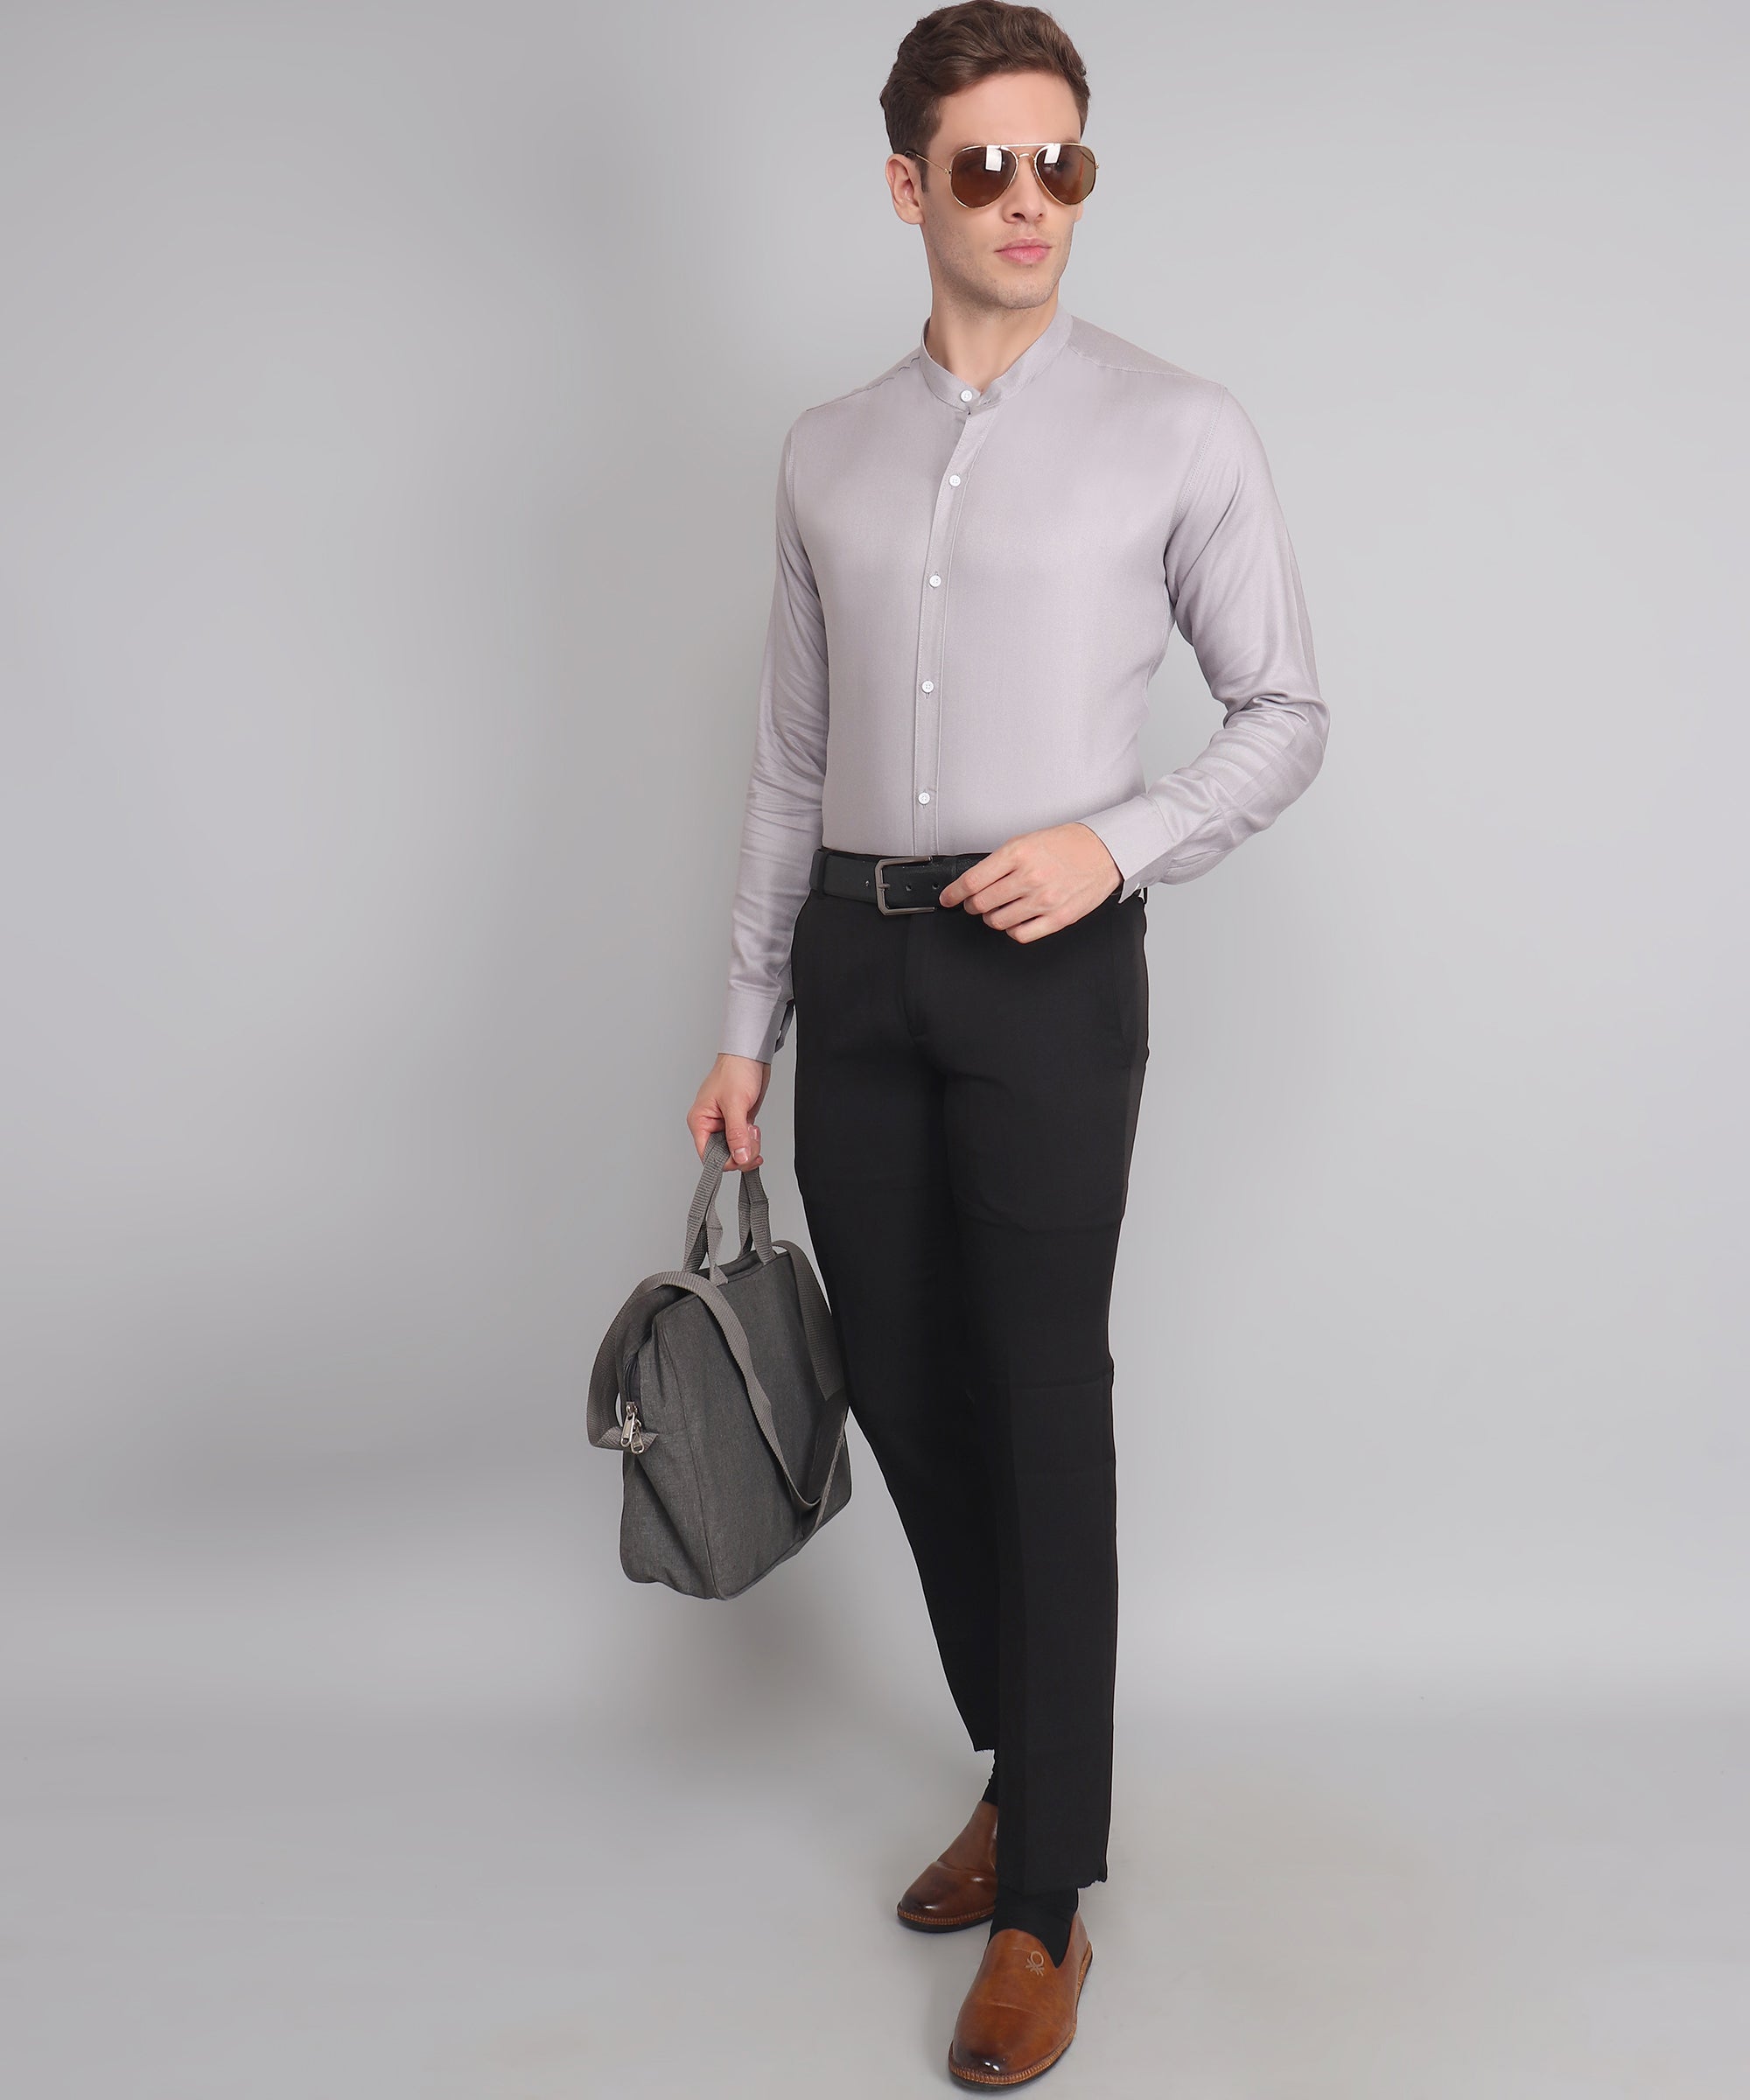 Twill Triumph: Unveiling the Refined Elegance of Twill Fabric Shirts for Men